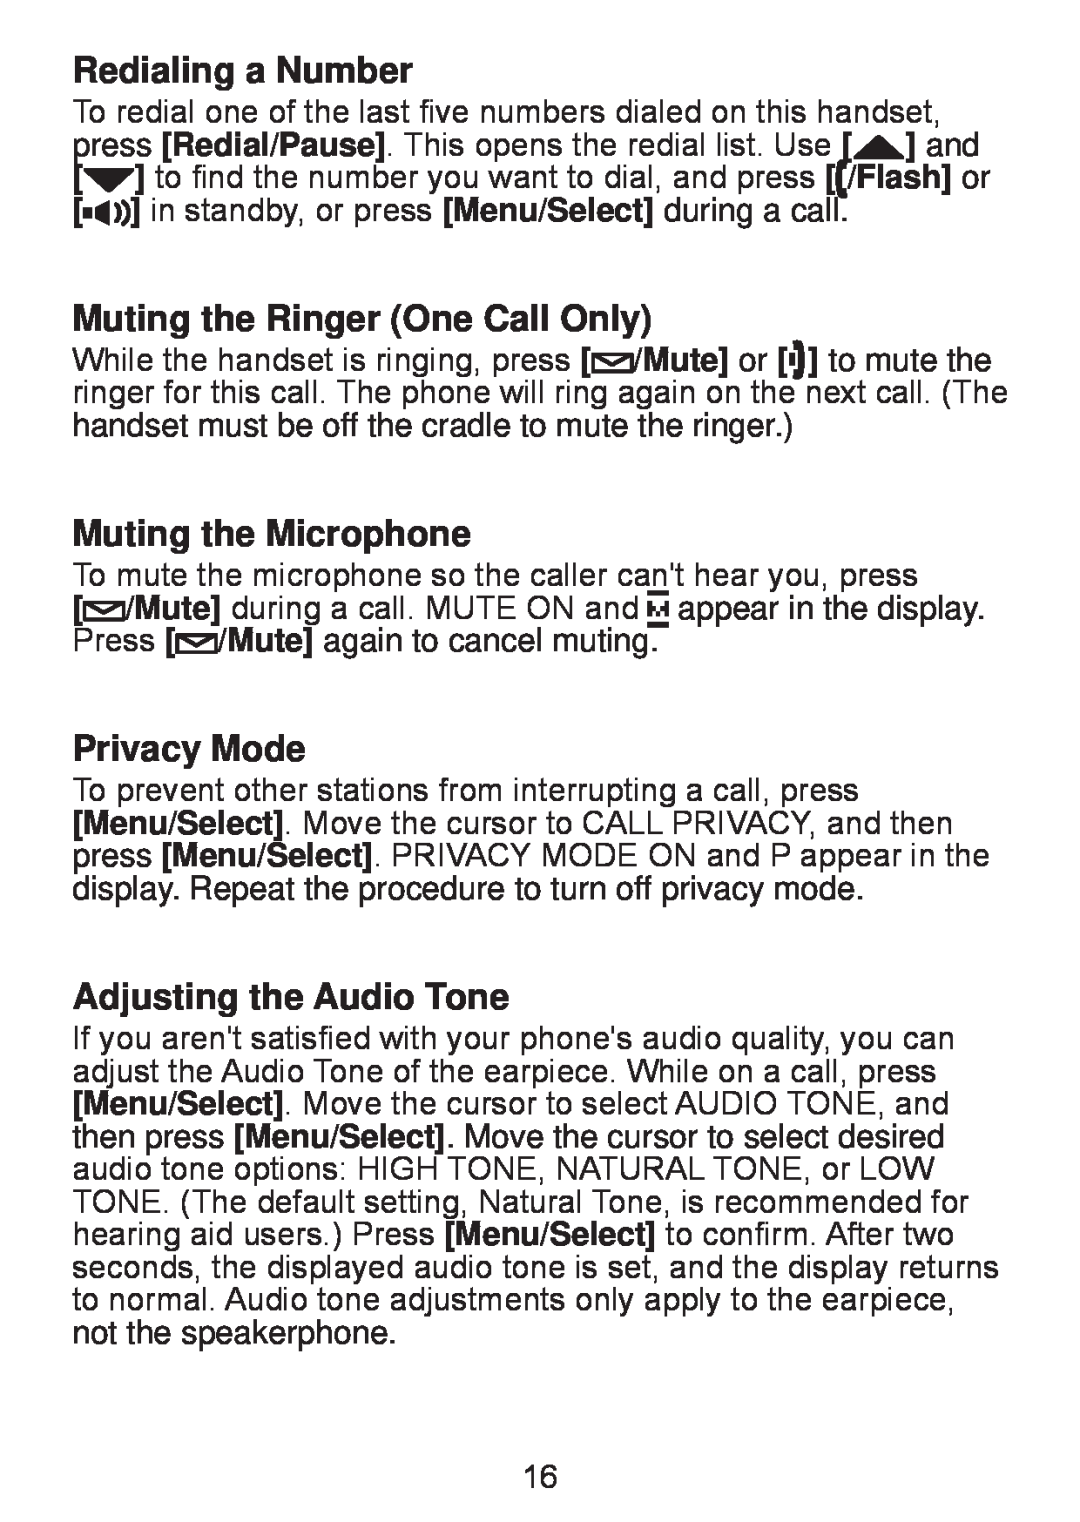 Uniden DWX207 manual Redialing a Number, Muting the Ringer One Call Only, Muting the Microphone, Privacy Mode 